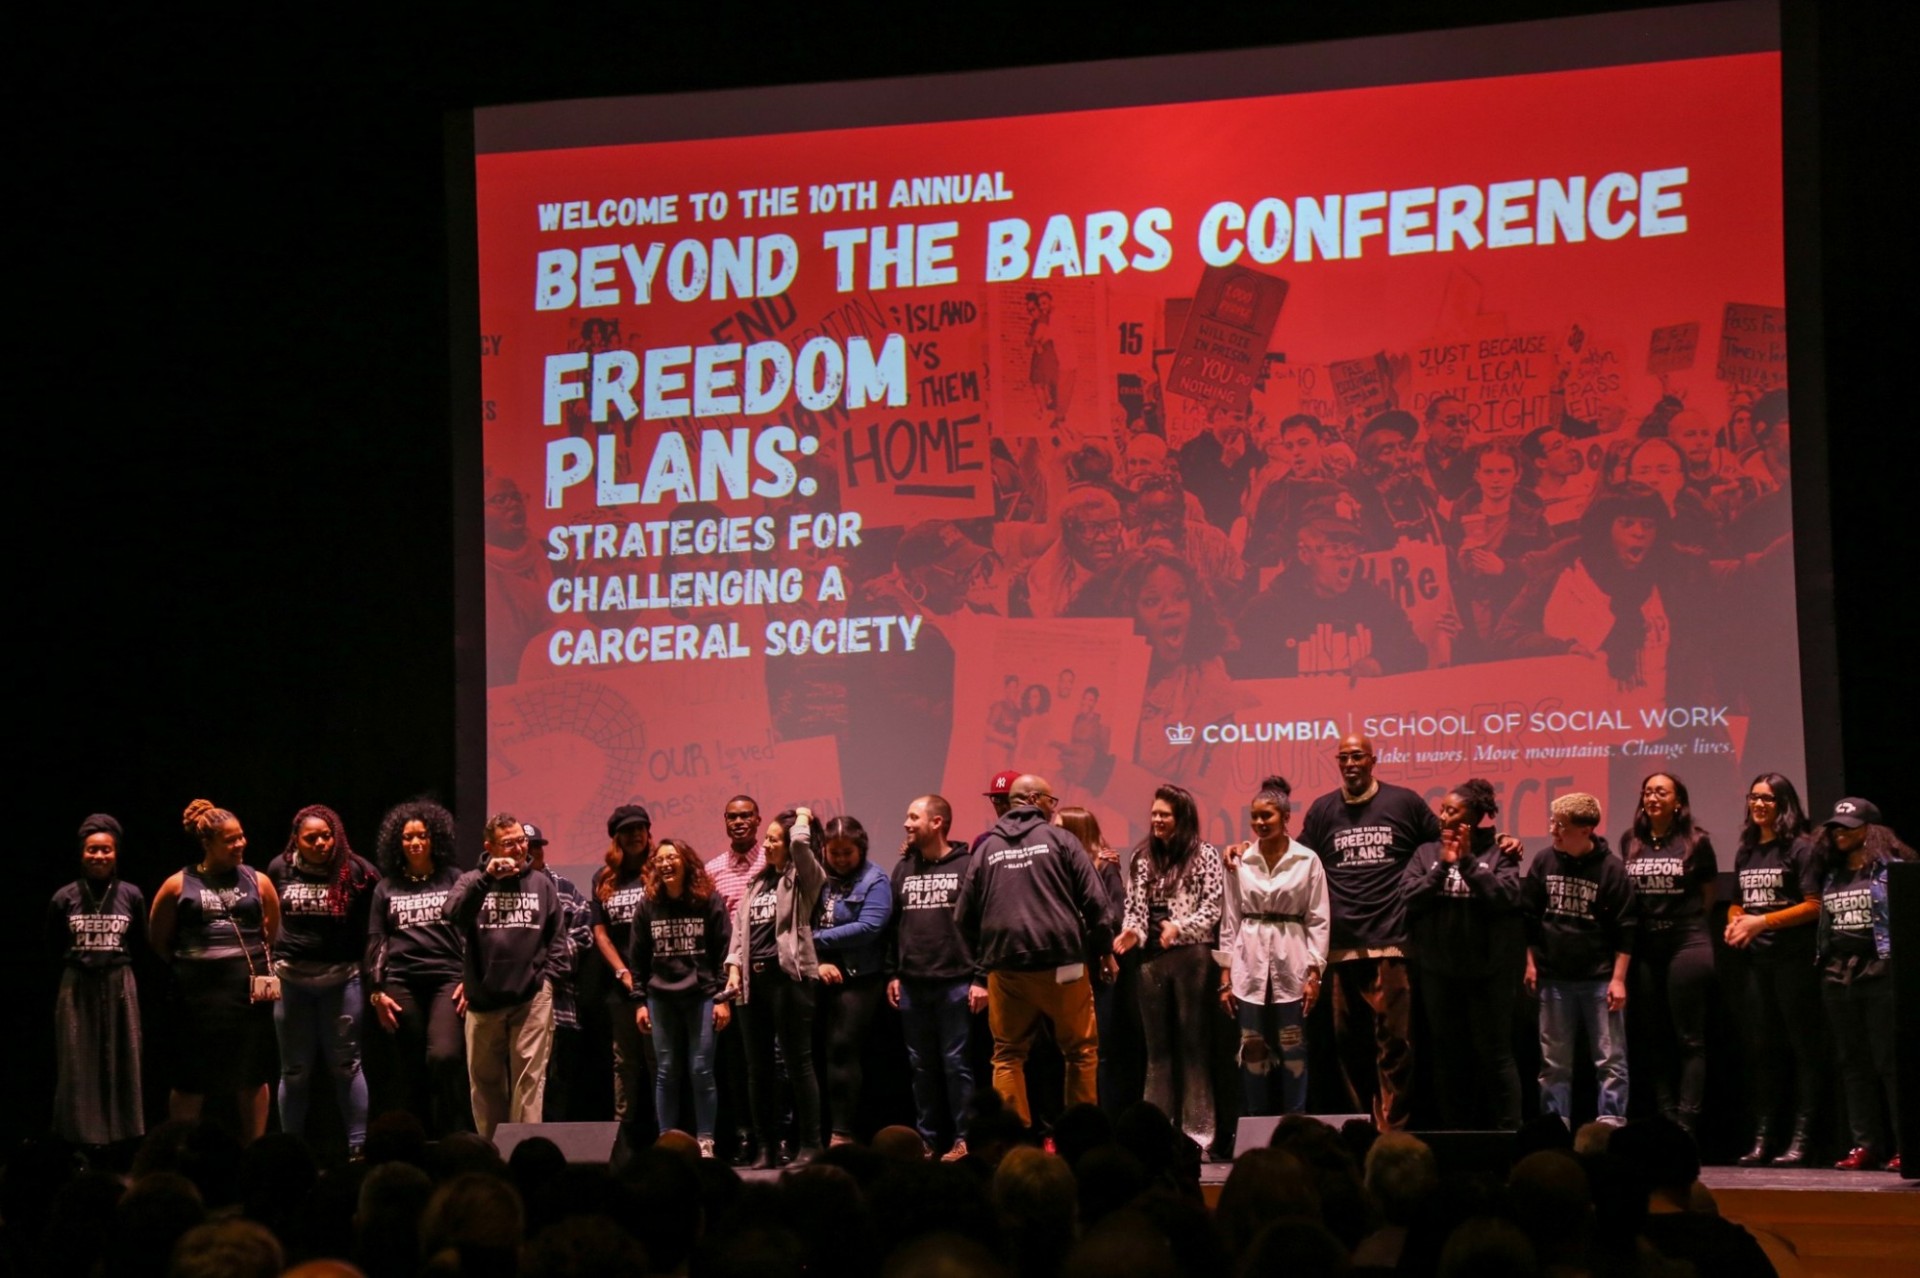 Beyond the Bars fellows on stage at the 2020 Beyond the Bars Conference